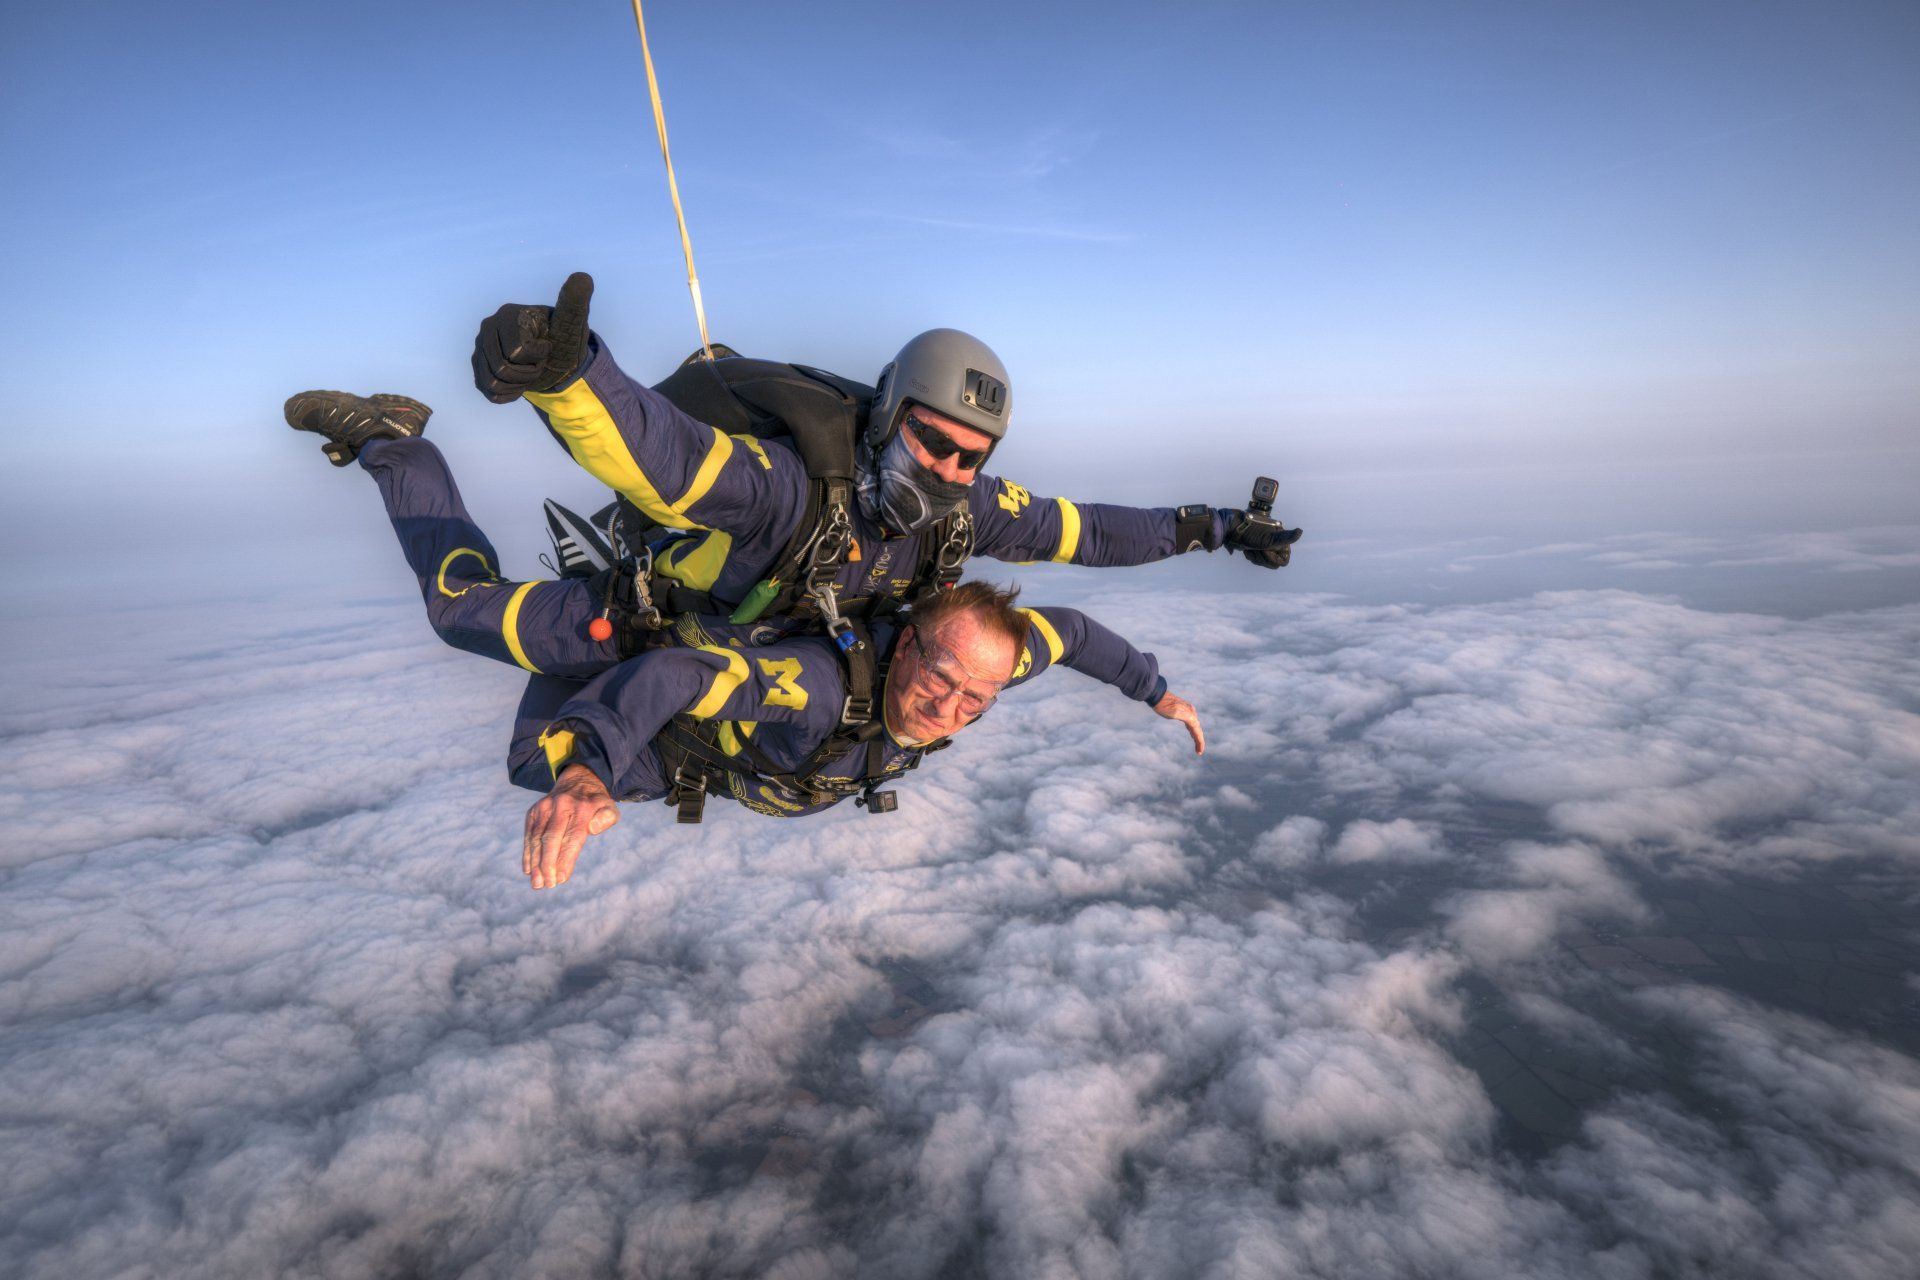 Fastest time to tandem skydive all seven continents: James C. Wigginton and Thomas J. Noonan lll set world record / Europe - Ireland